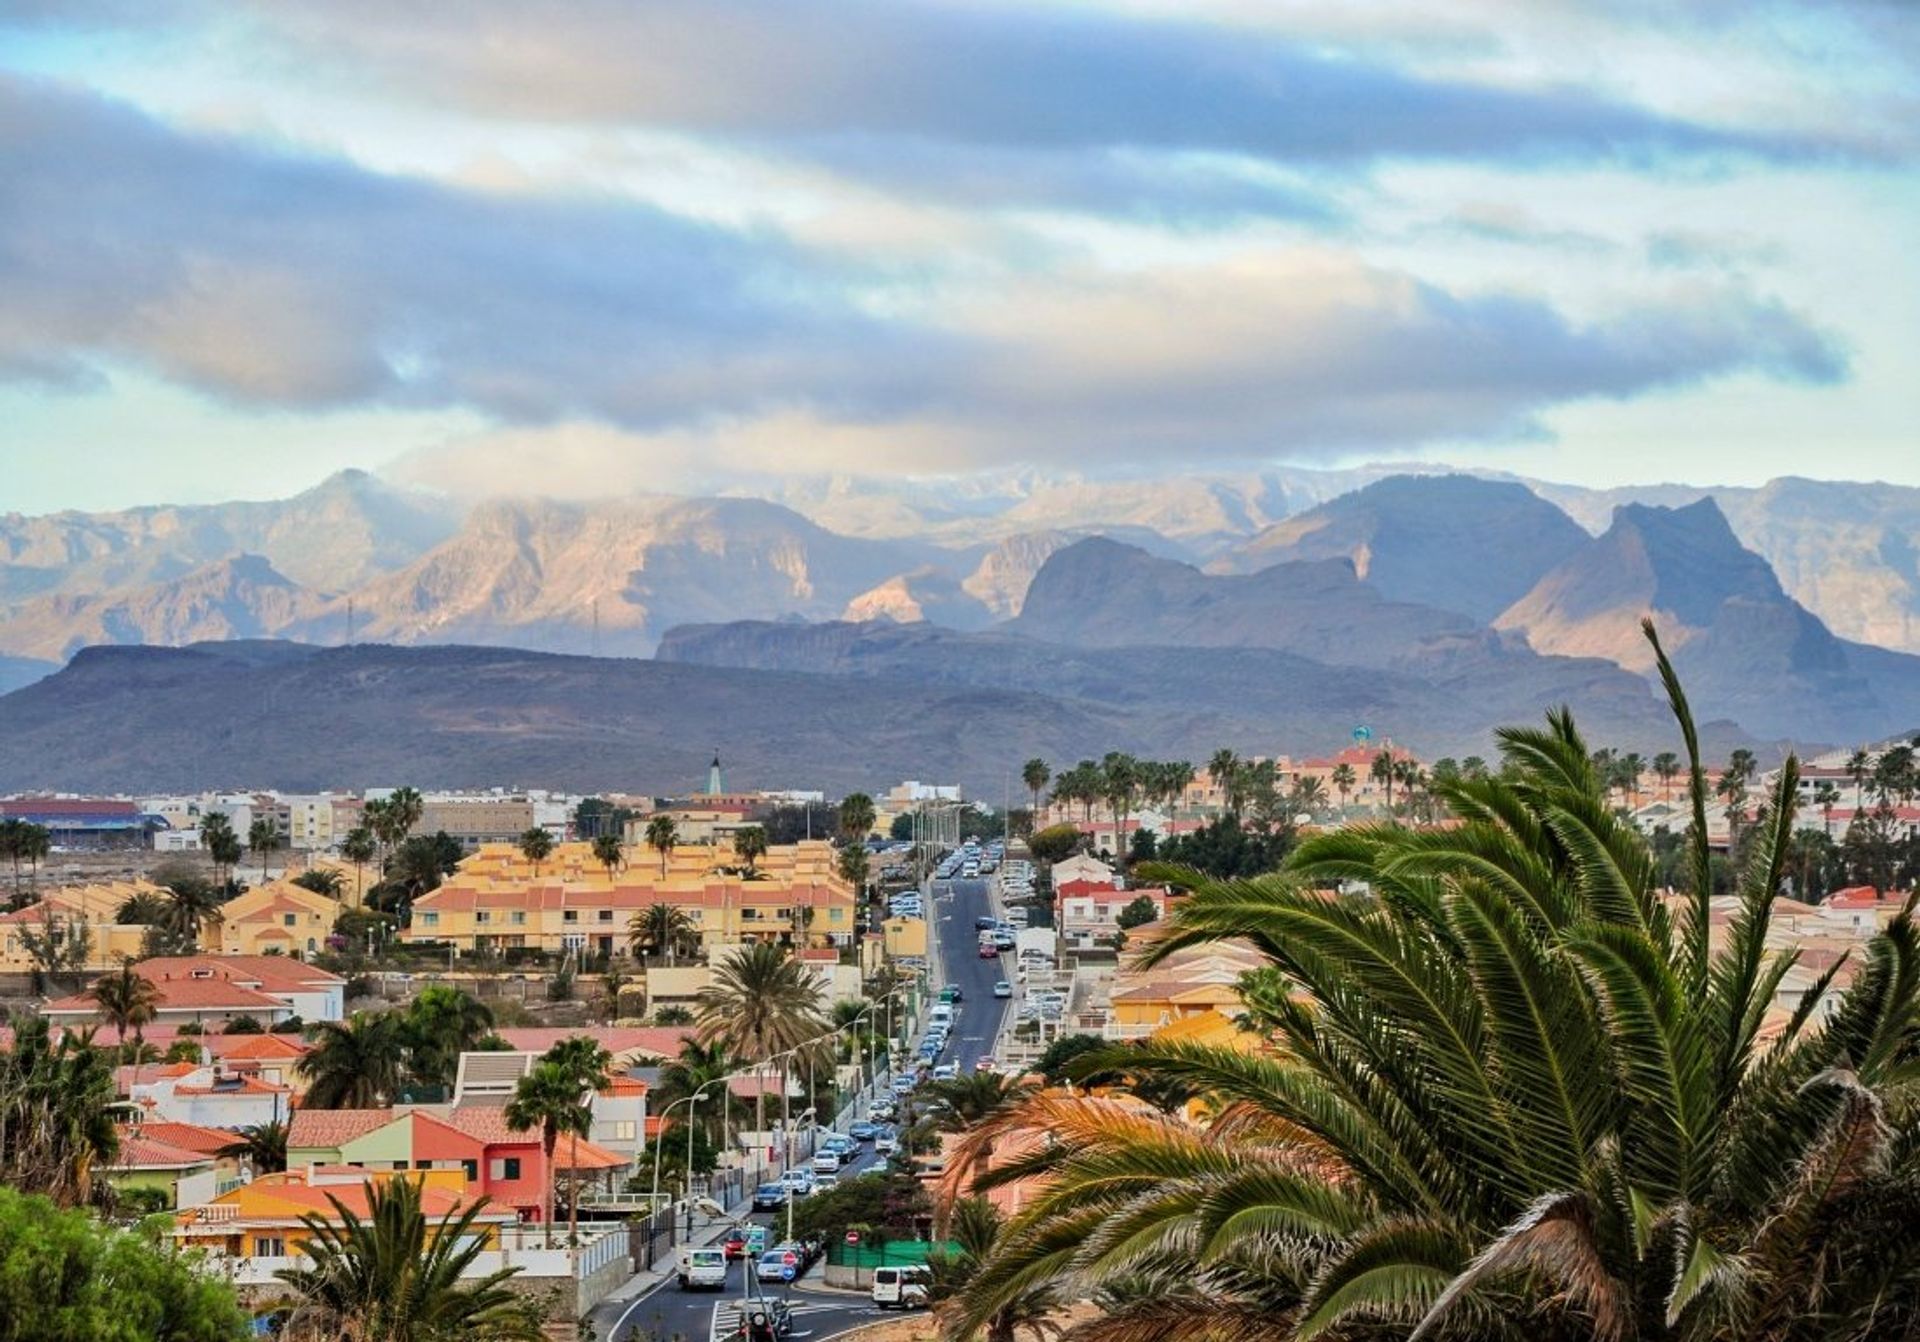 The southern Gran Canarian mountains add a beautiful border to the resort - a mountain biker's dream!